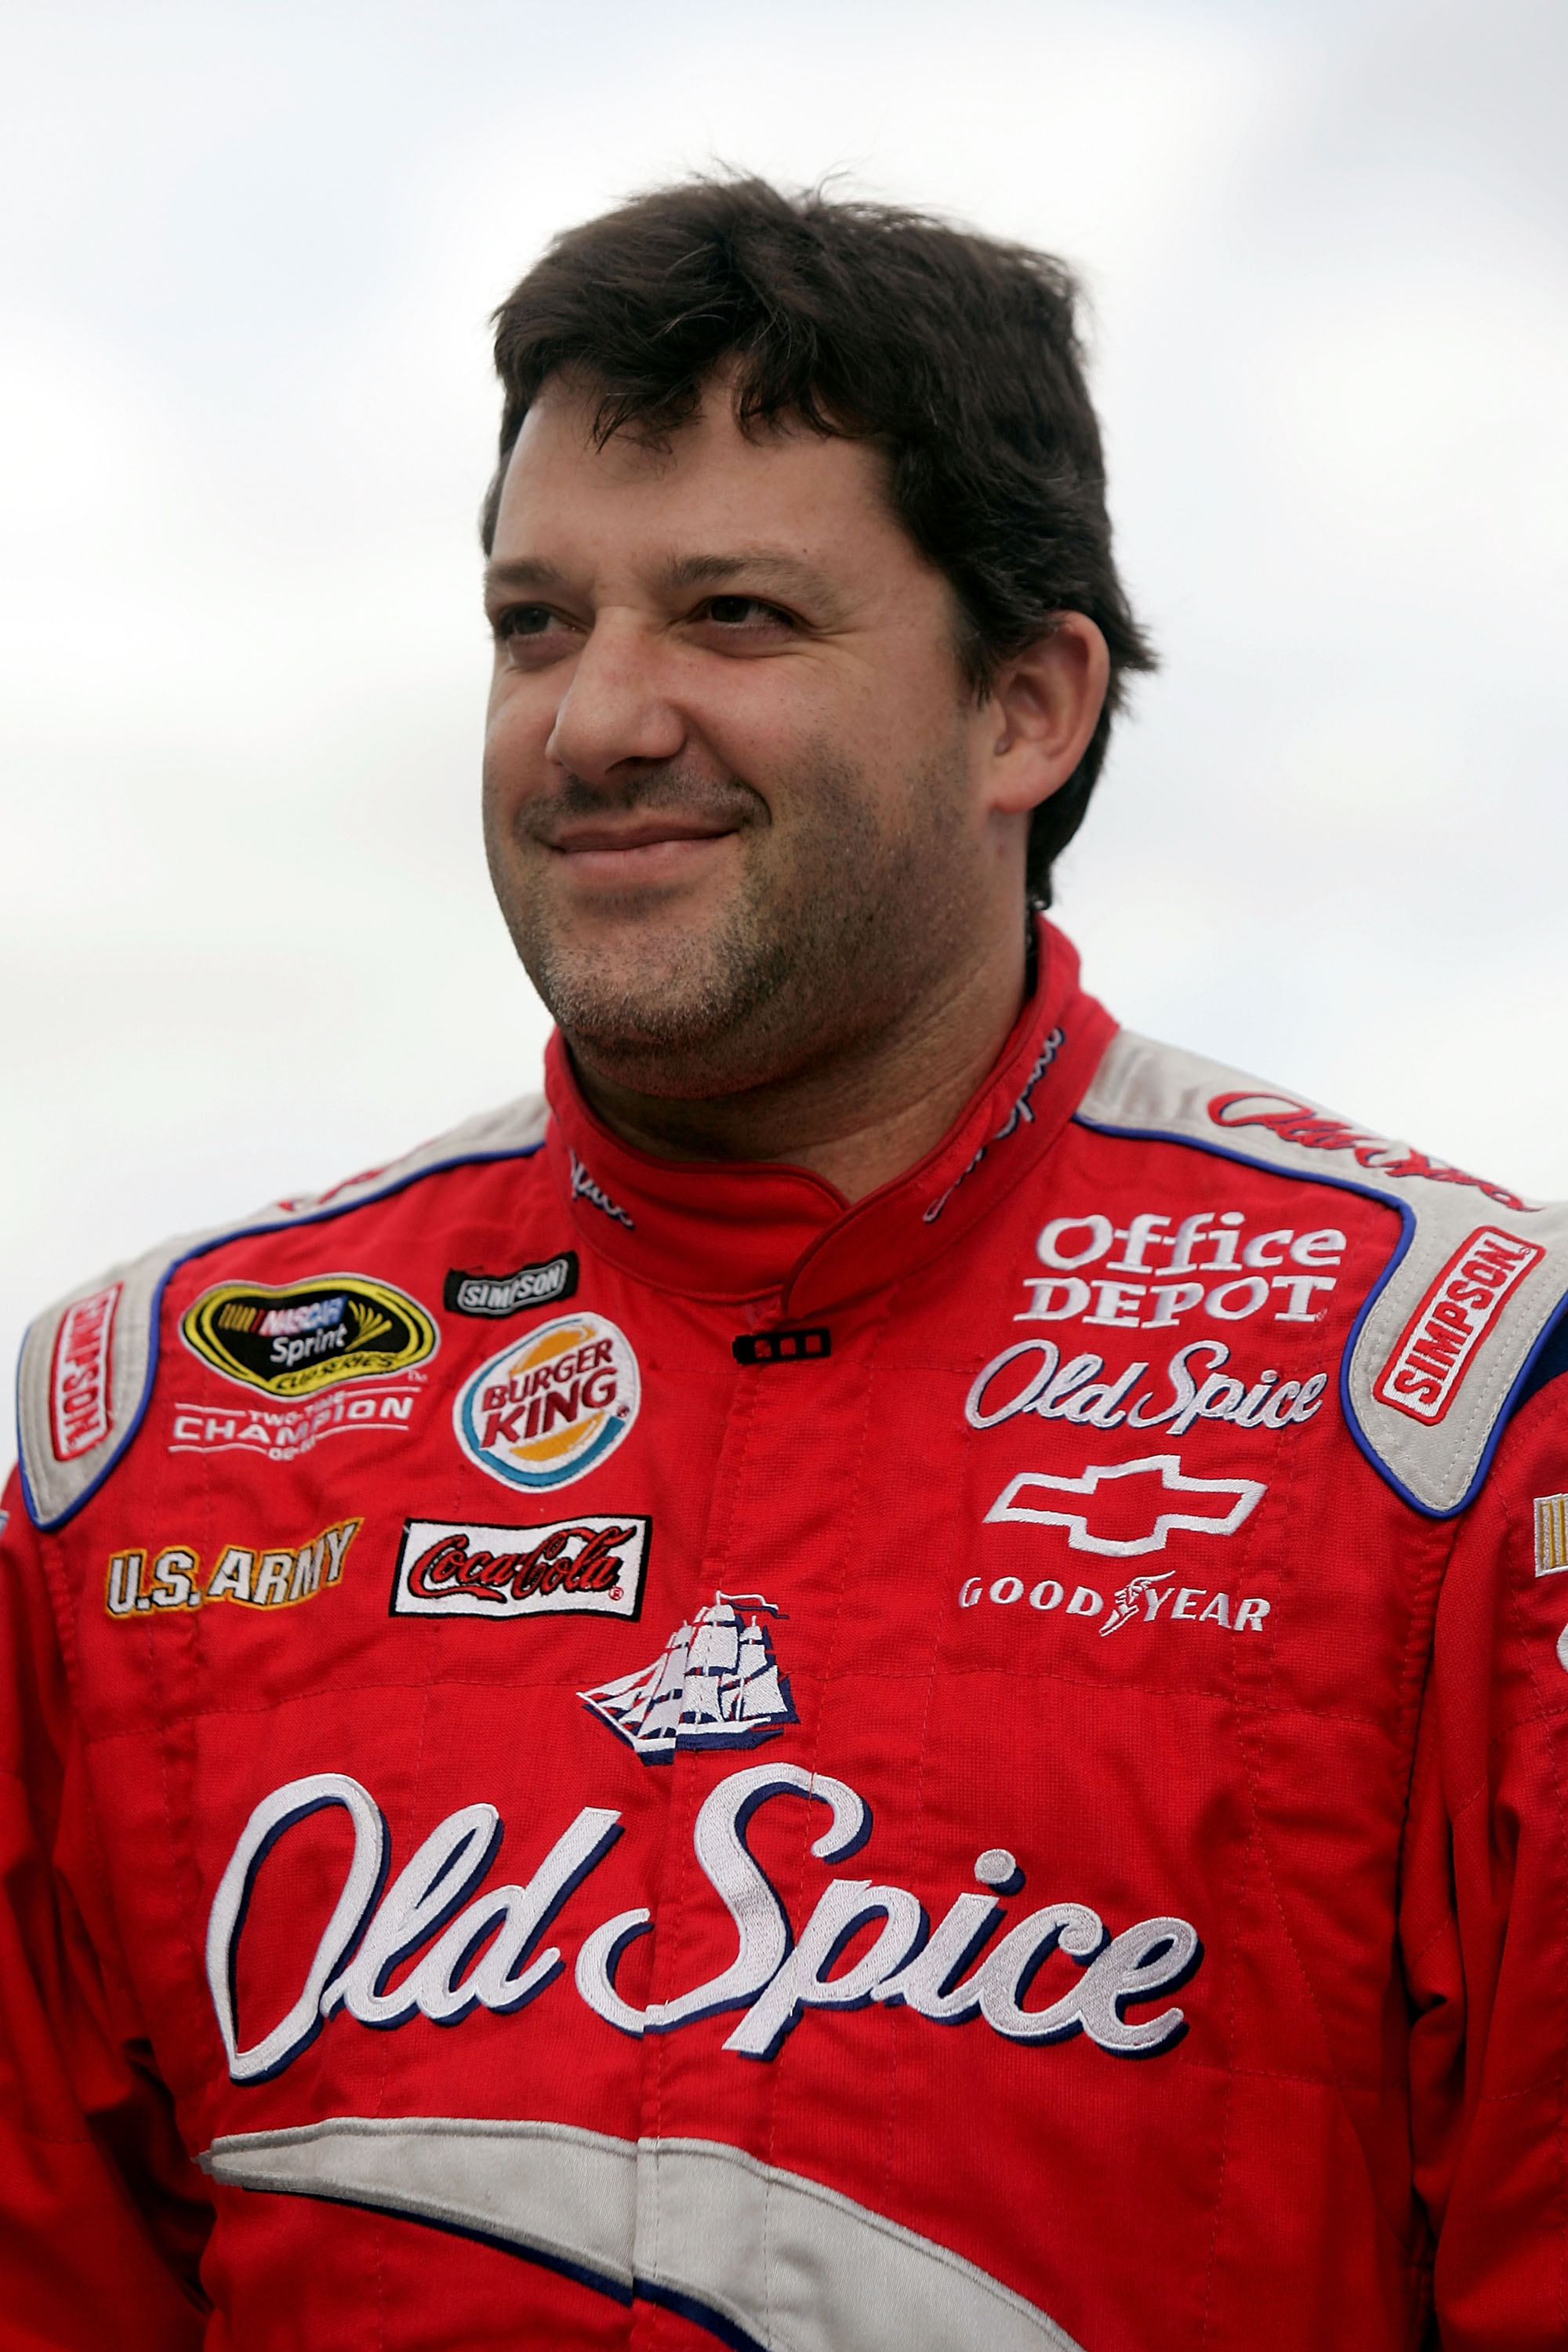 MARTINSVILLE, VA - OCTOBER 23:  Tony Stewart, driver of the #14 Old Spice/Office Depot Chevrolet, stands on the grid during qualifying for the NASCAR Sprint Cup Series TUMS Fast Relief 500 at Martinsville Speedway on October 23, 2009 in Martinsville, Virg